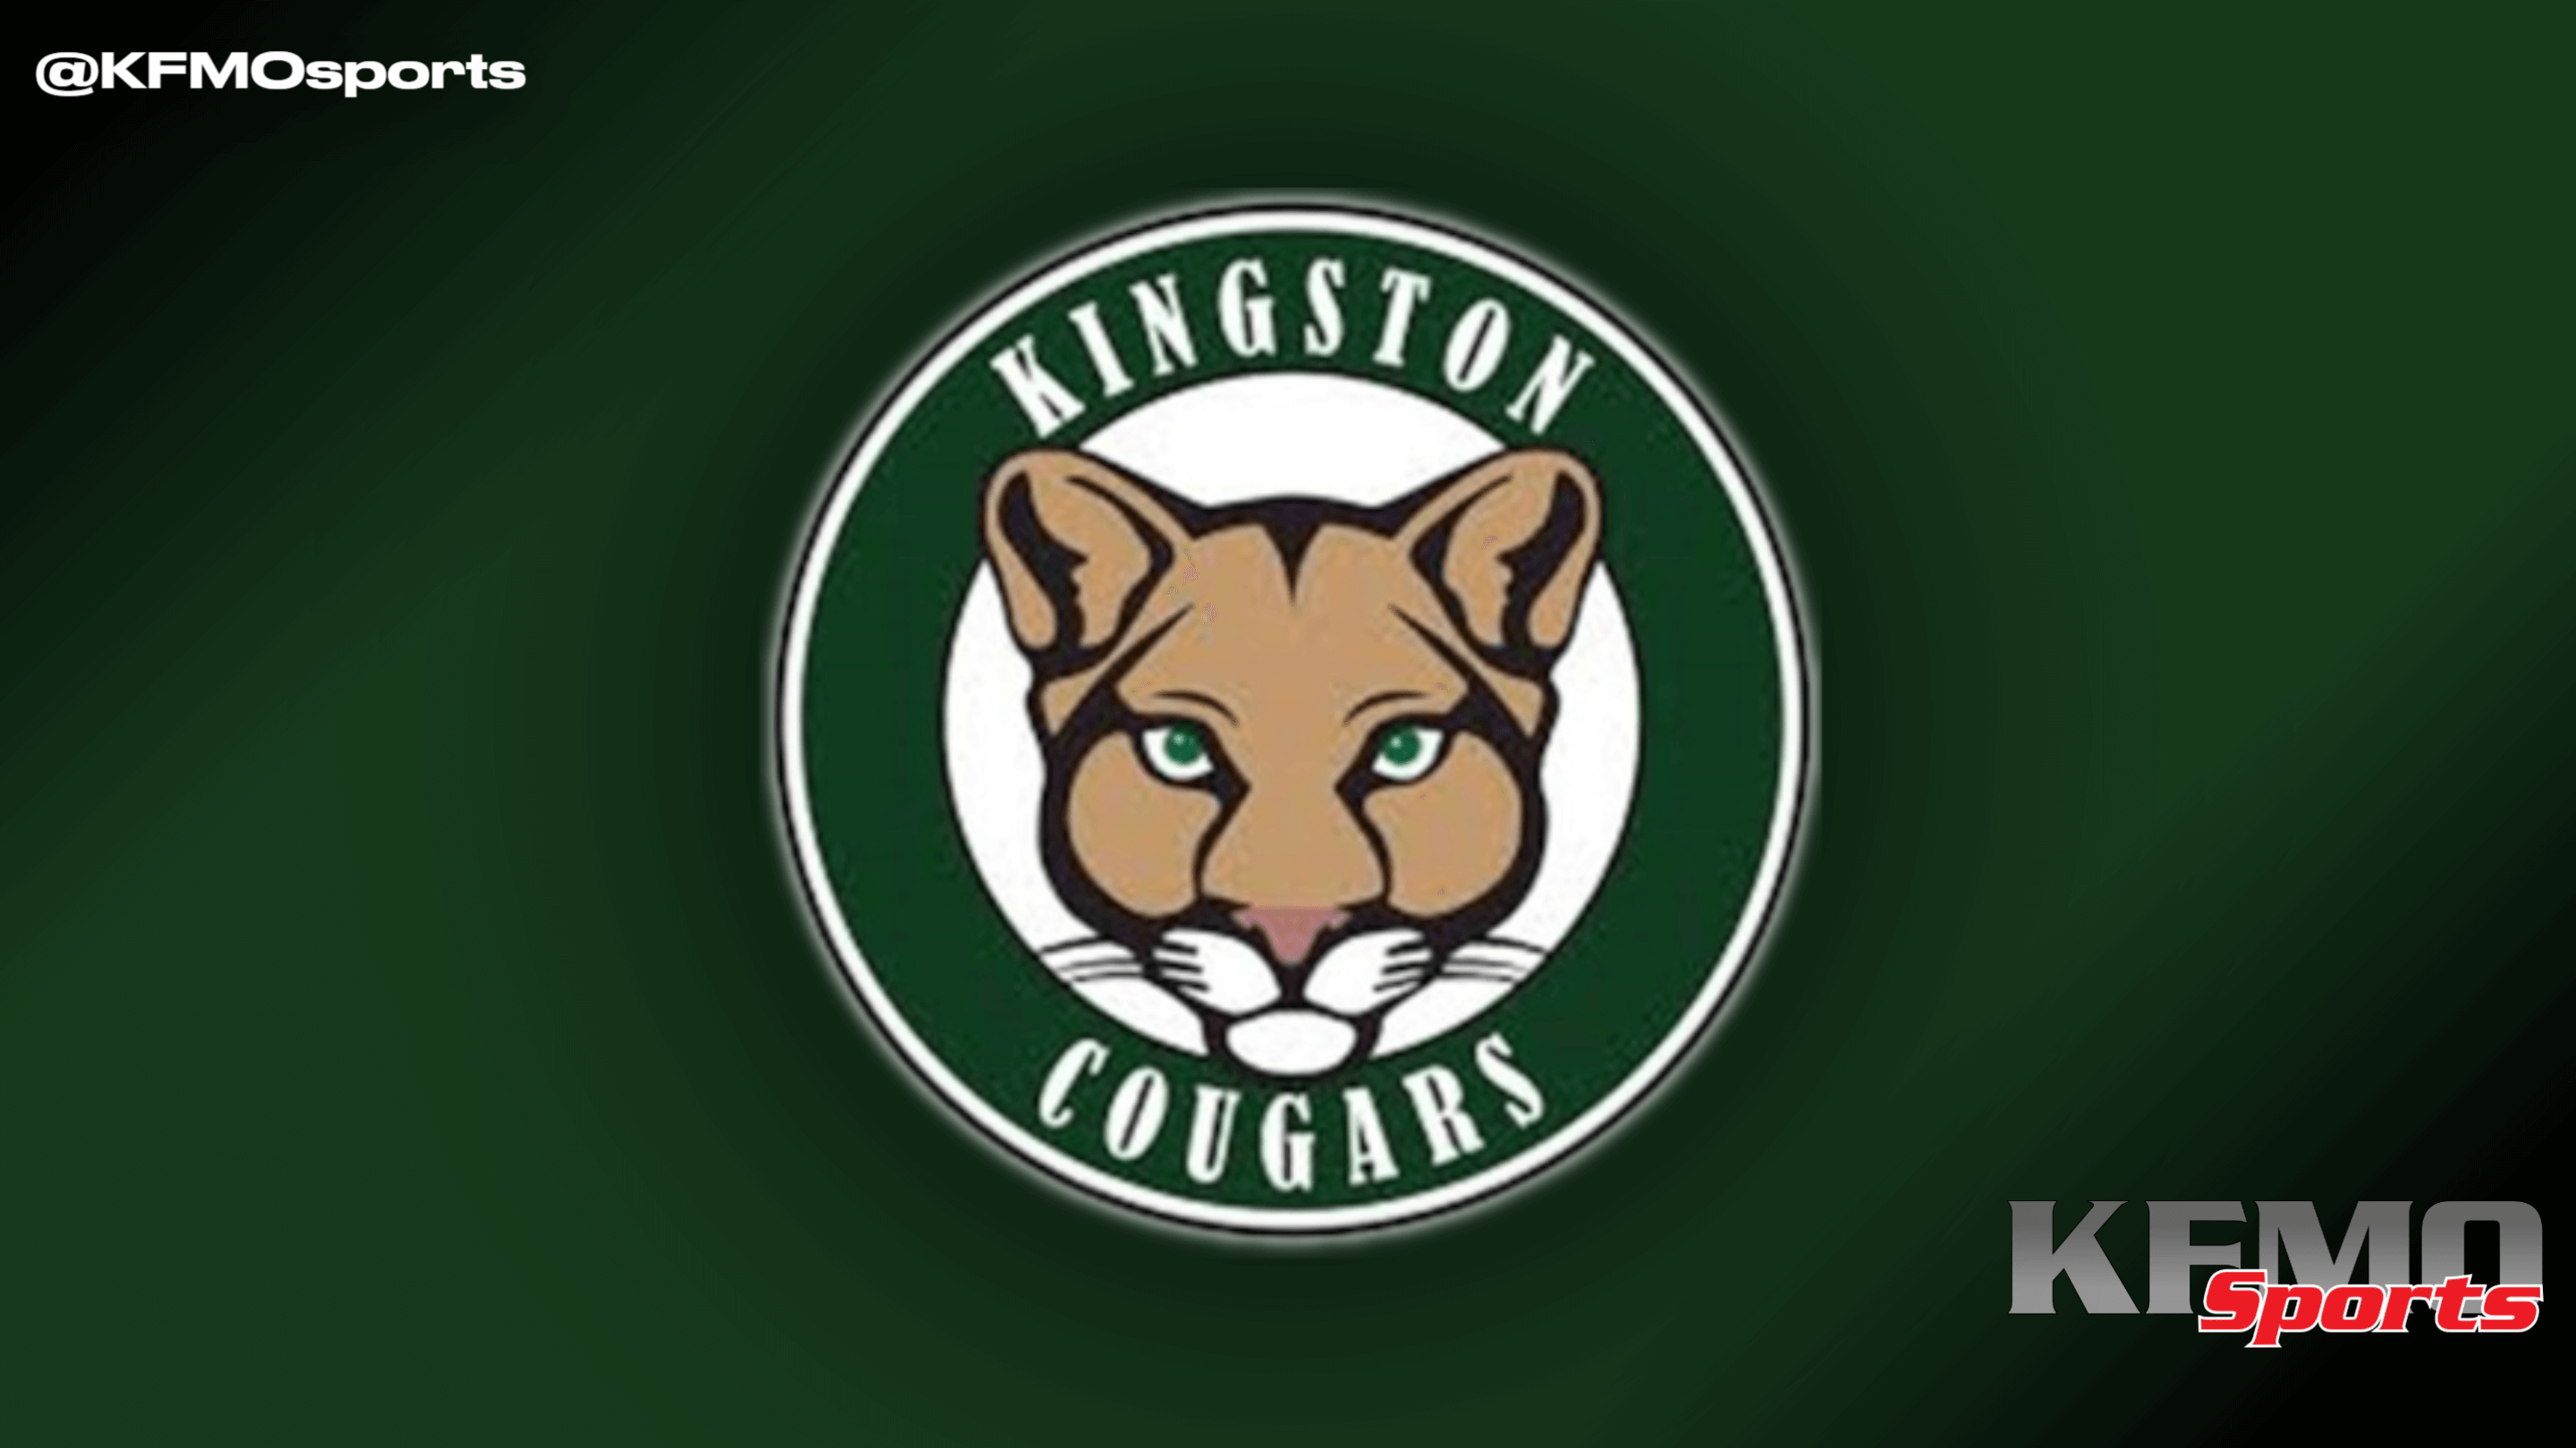 Kingston Cougars Remain Undefeated in Small School Conference with Friday Night Road Win over West County Bulldogs, 57-45